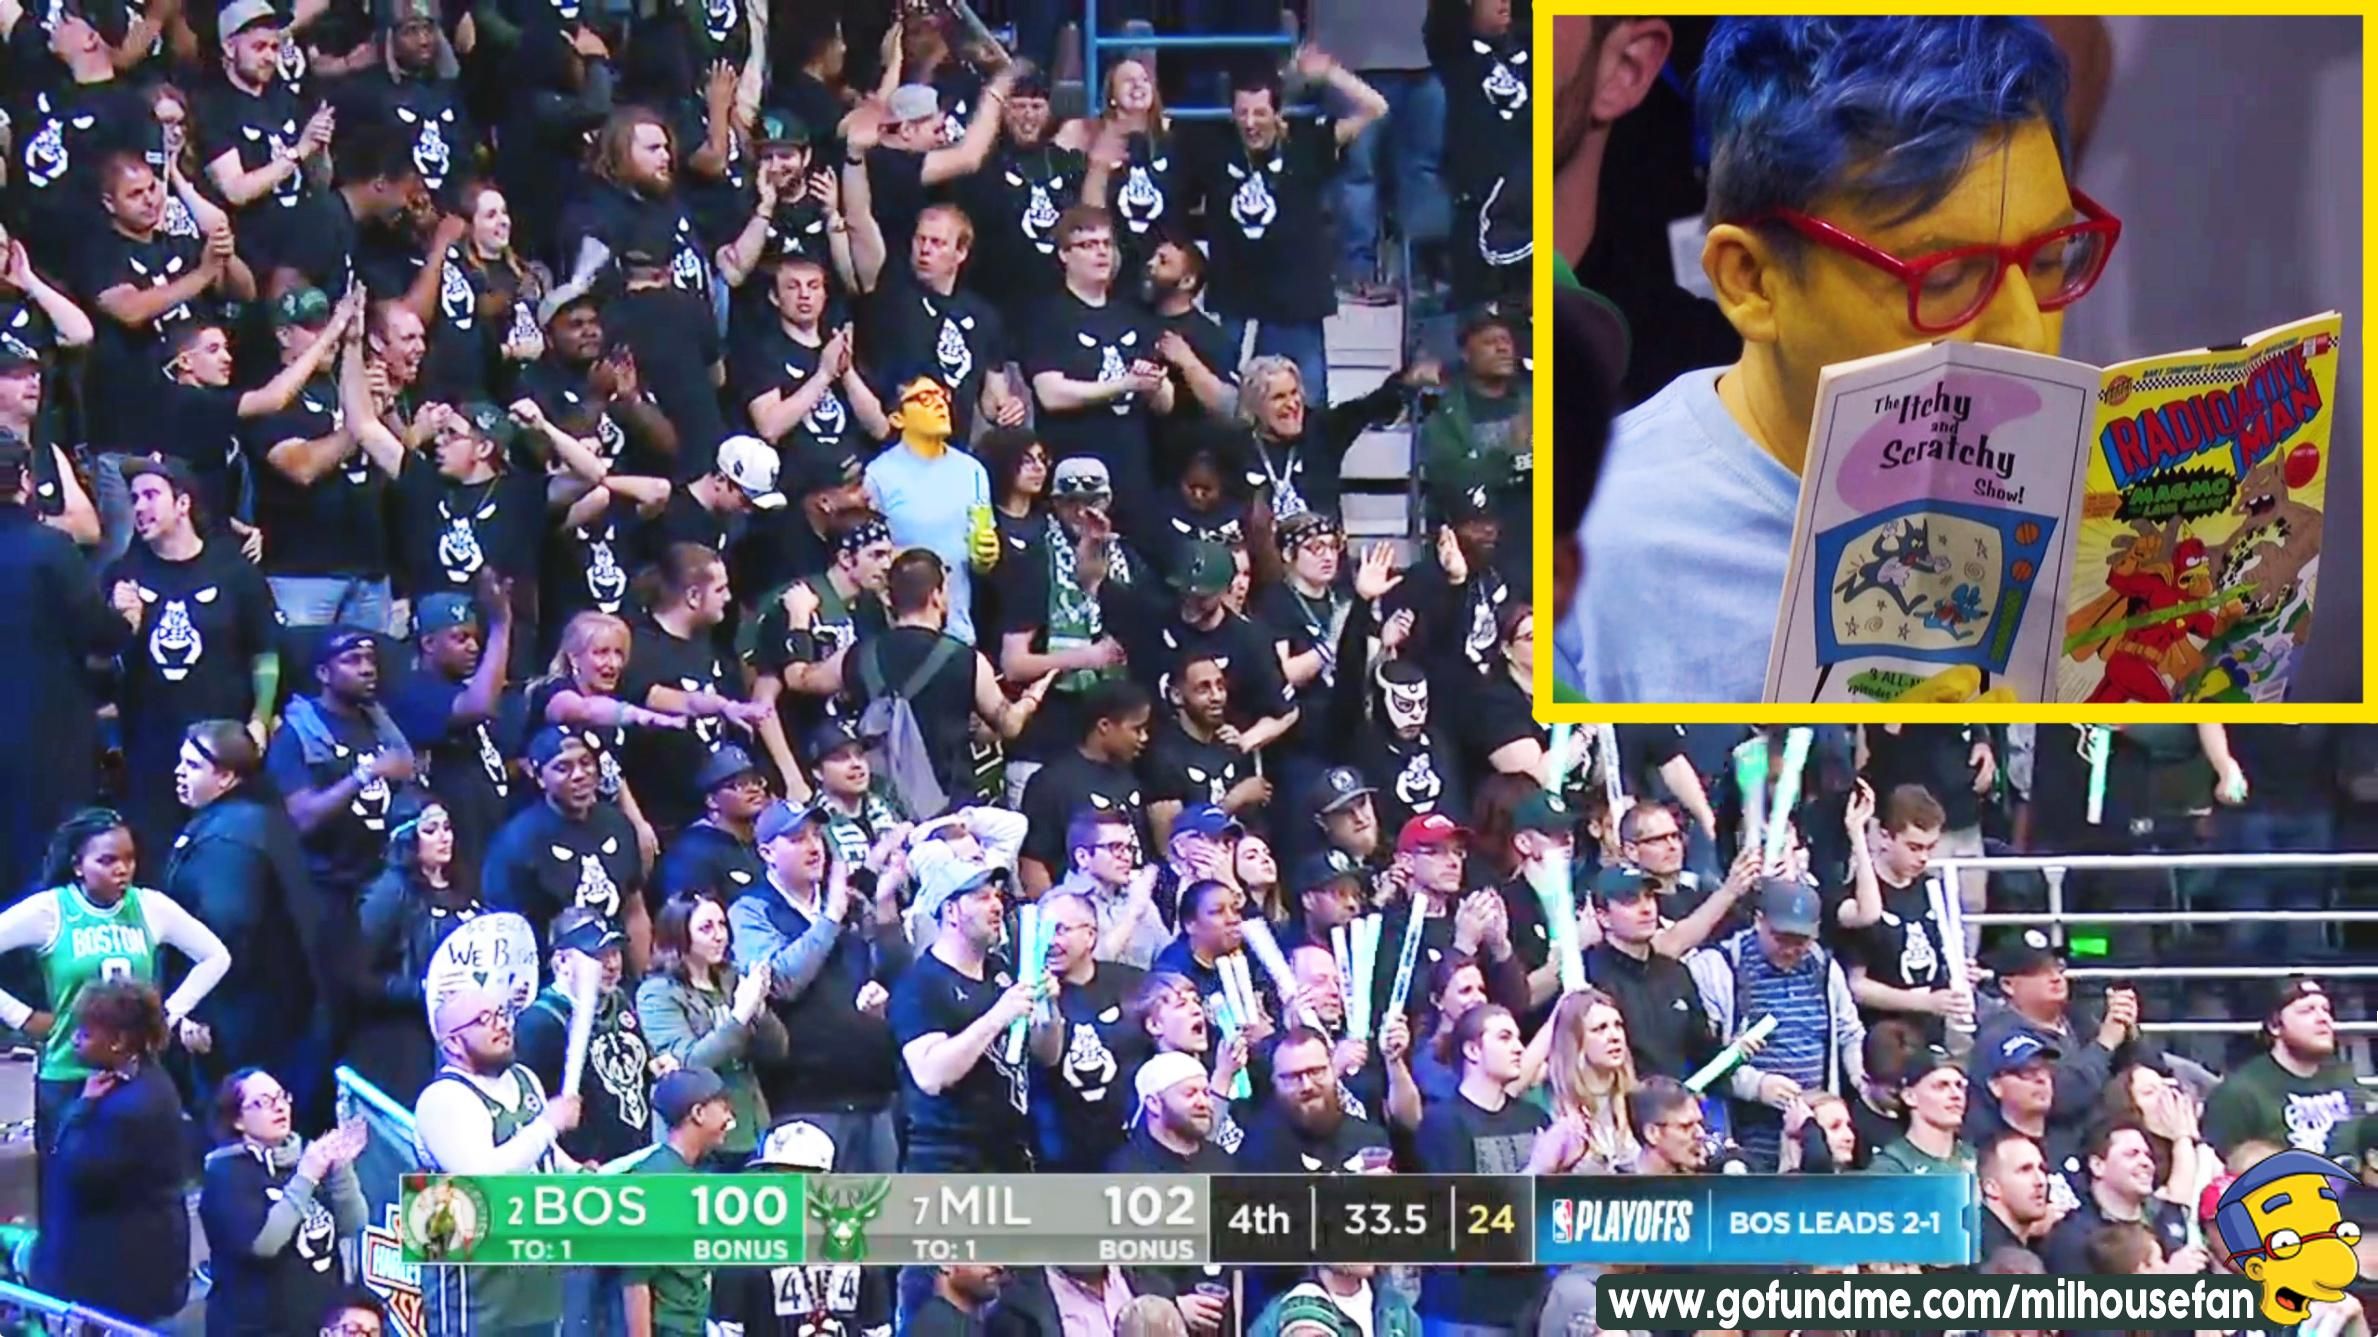 There was a dude dressed as Milhouse from The Simpsons at the Bucks/Celtics game reading a Radioactive Man comic and drinking a Squishee. Now that's some commitment.